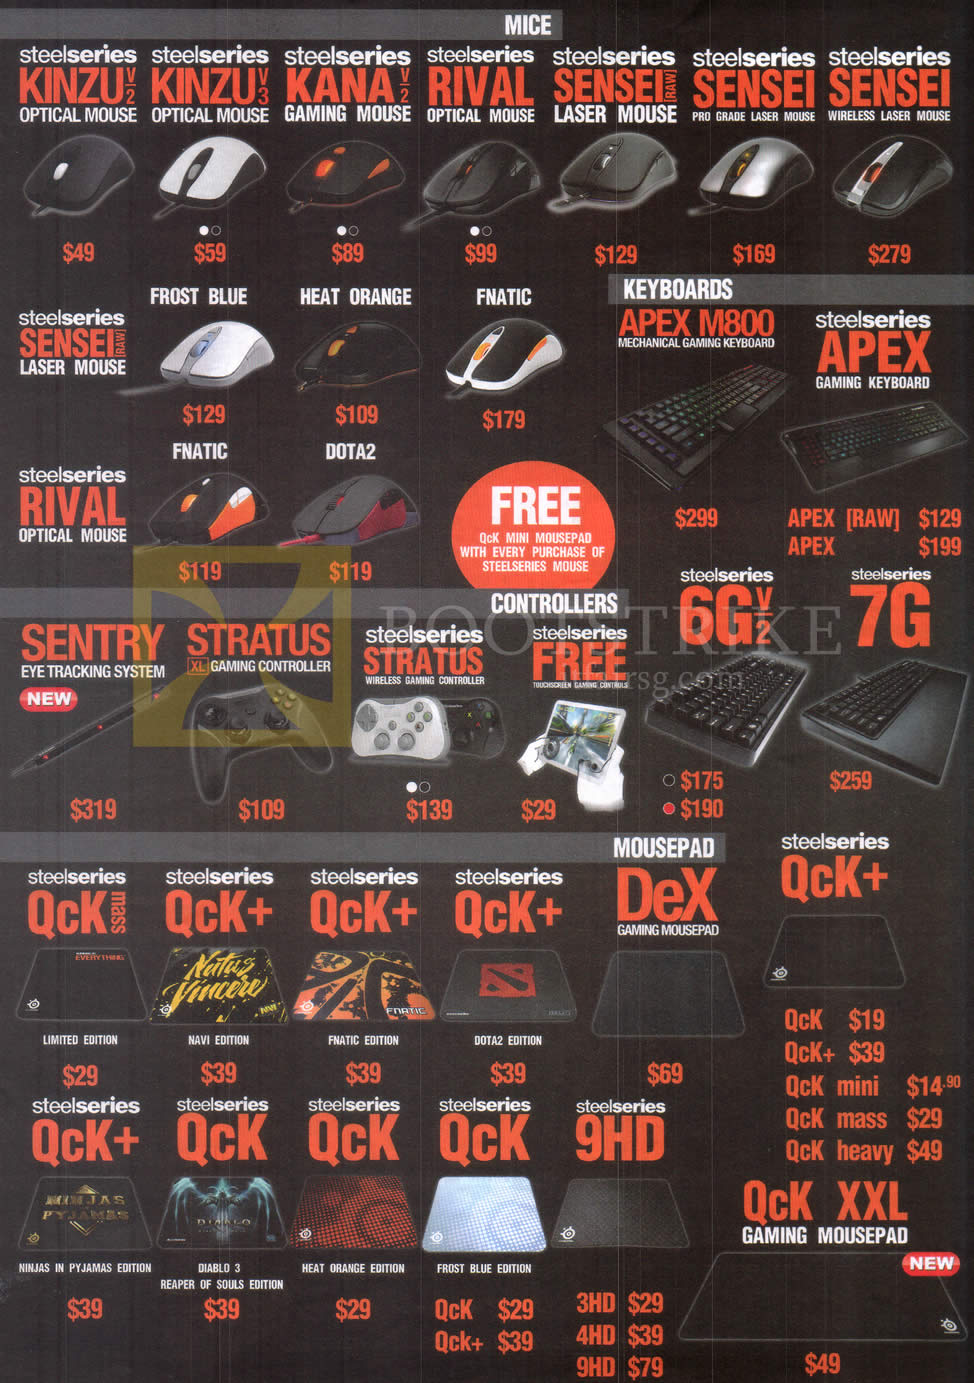 PC SHOW 2015 price list image brochure of Steelseries Mouses, Keyboards, Controllers, Mousepad Sensei, Rival, Apex, QCK Plus